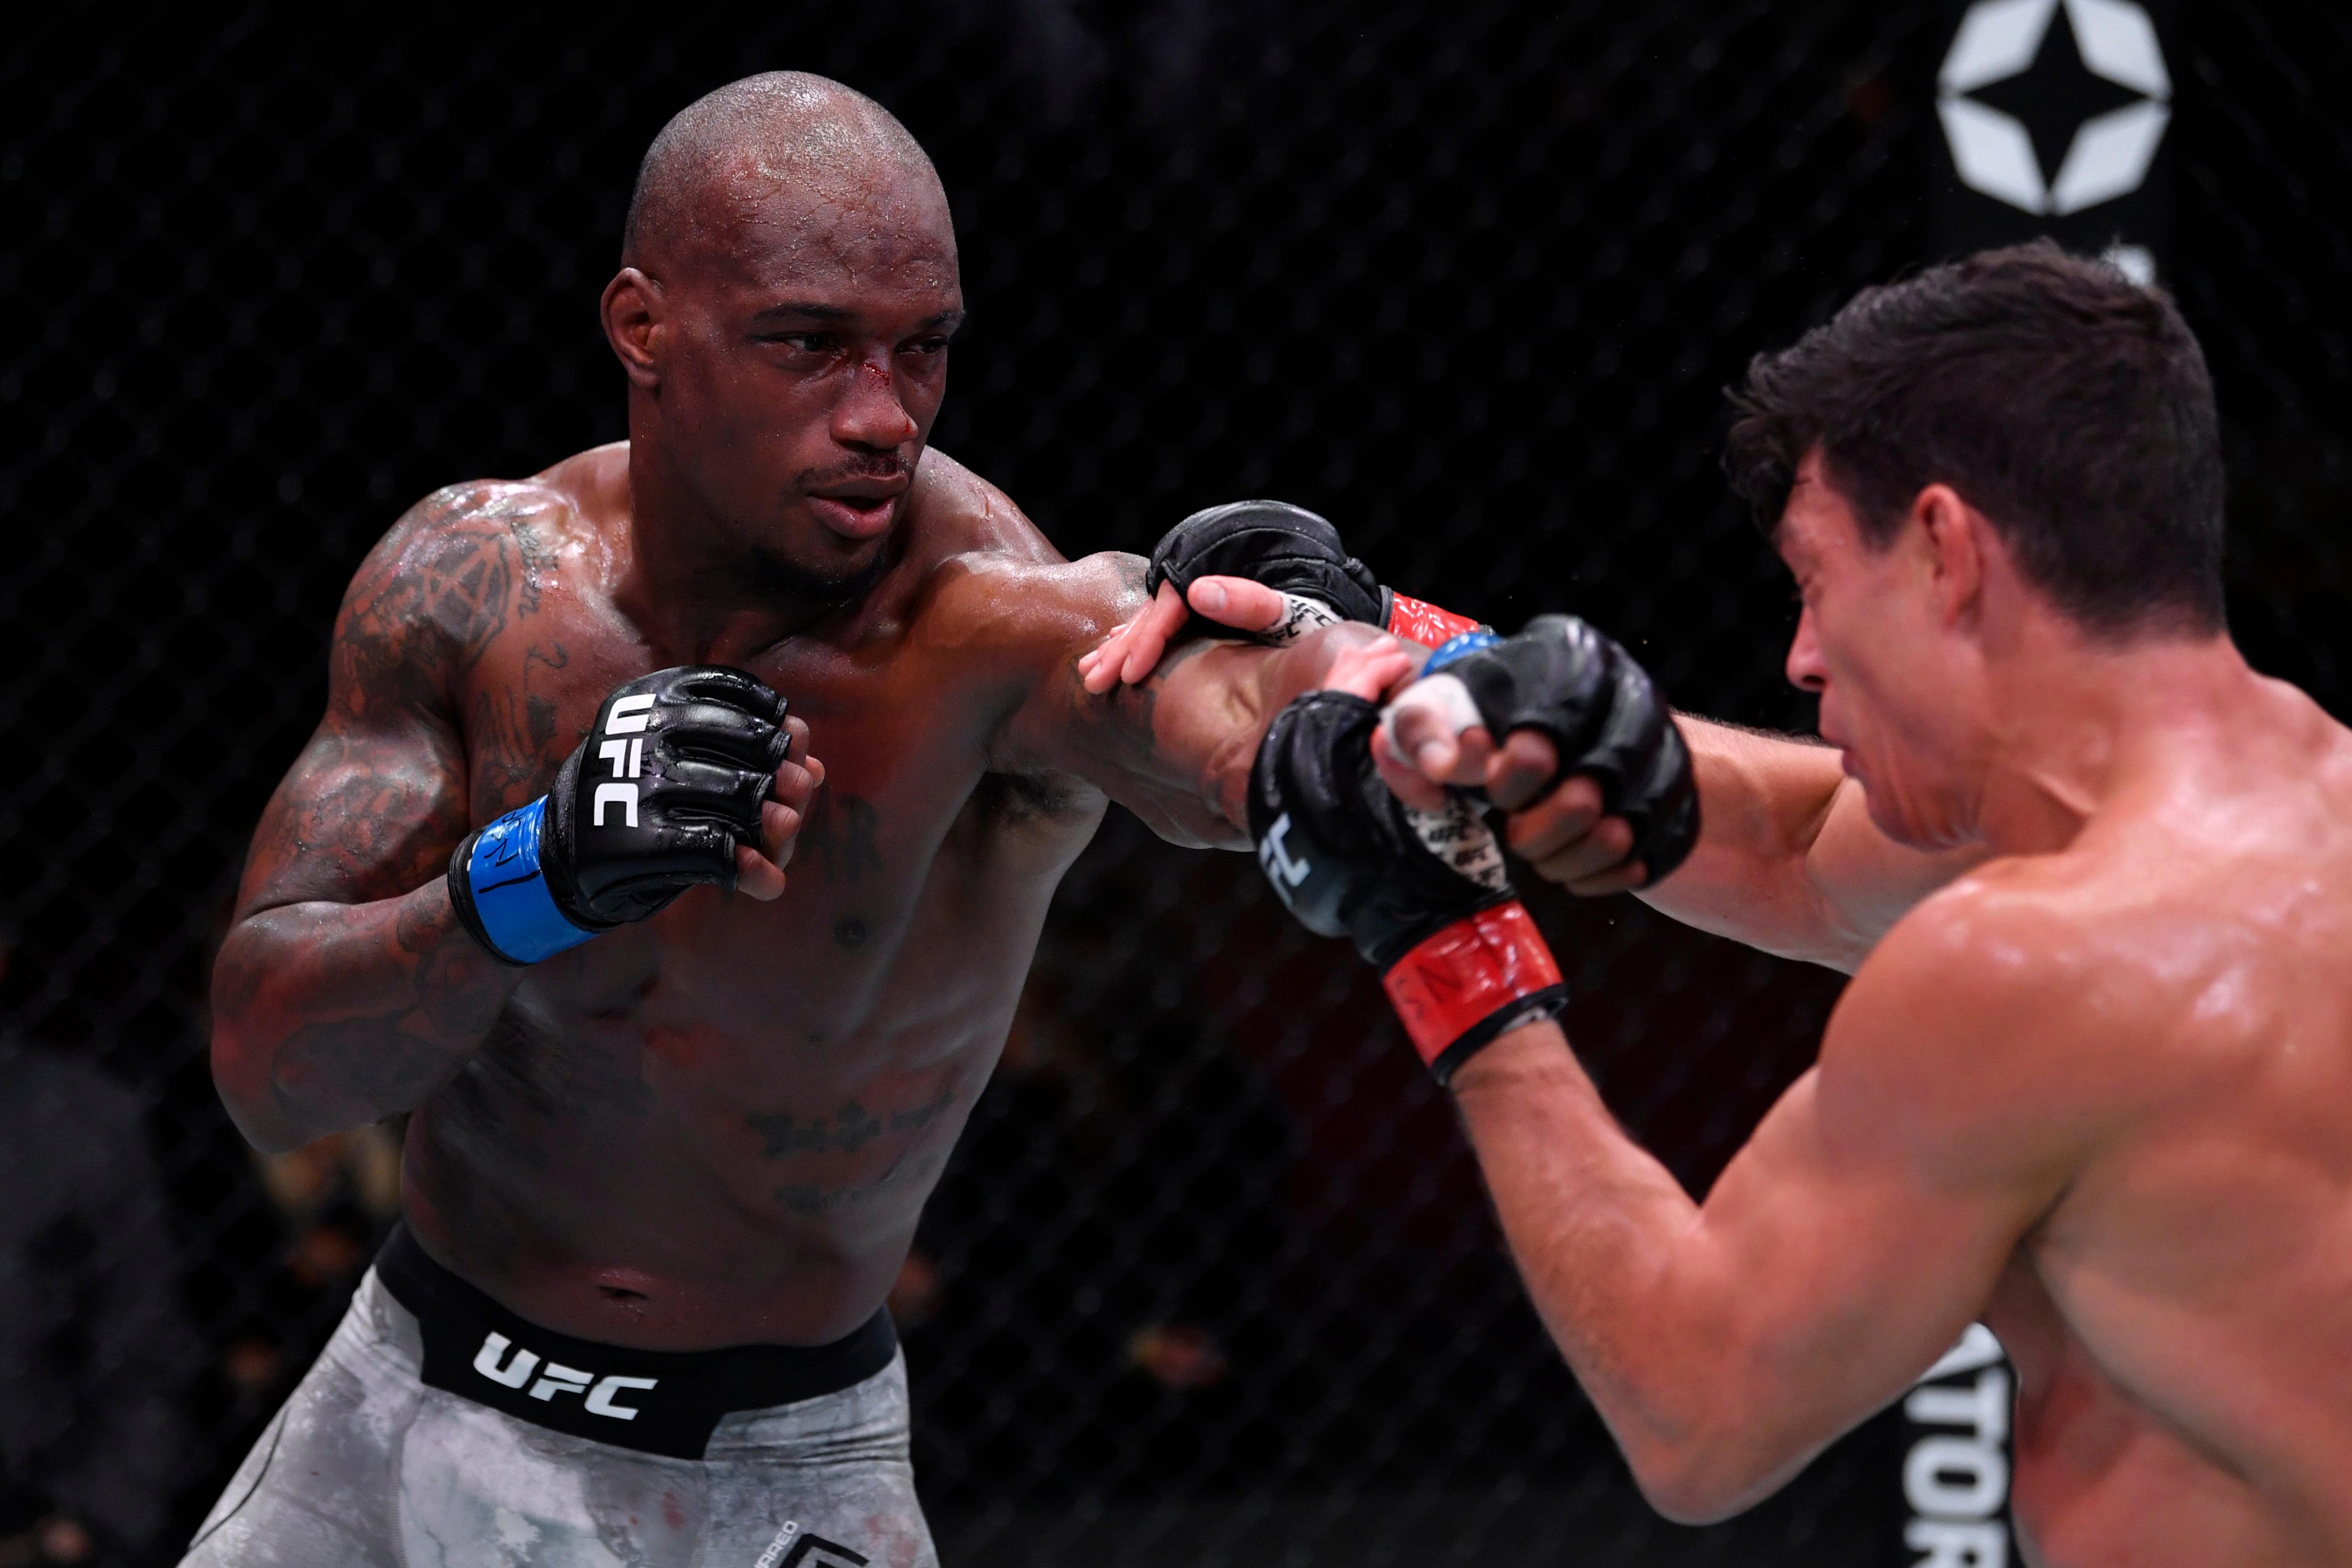 ufc on espn 56 loses welterweight bout for 'medical reasons'